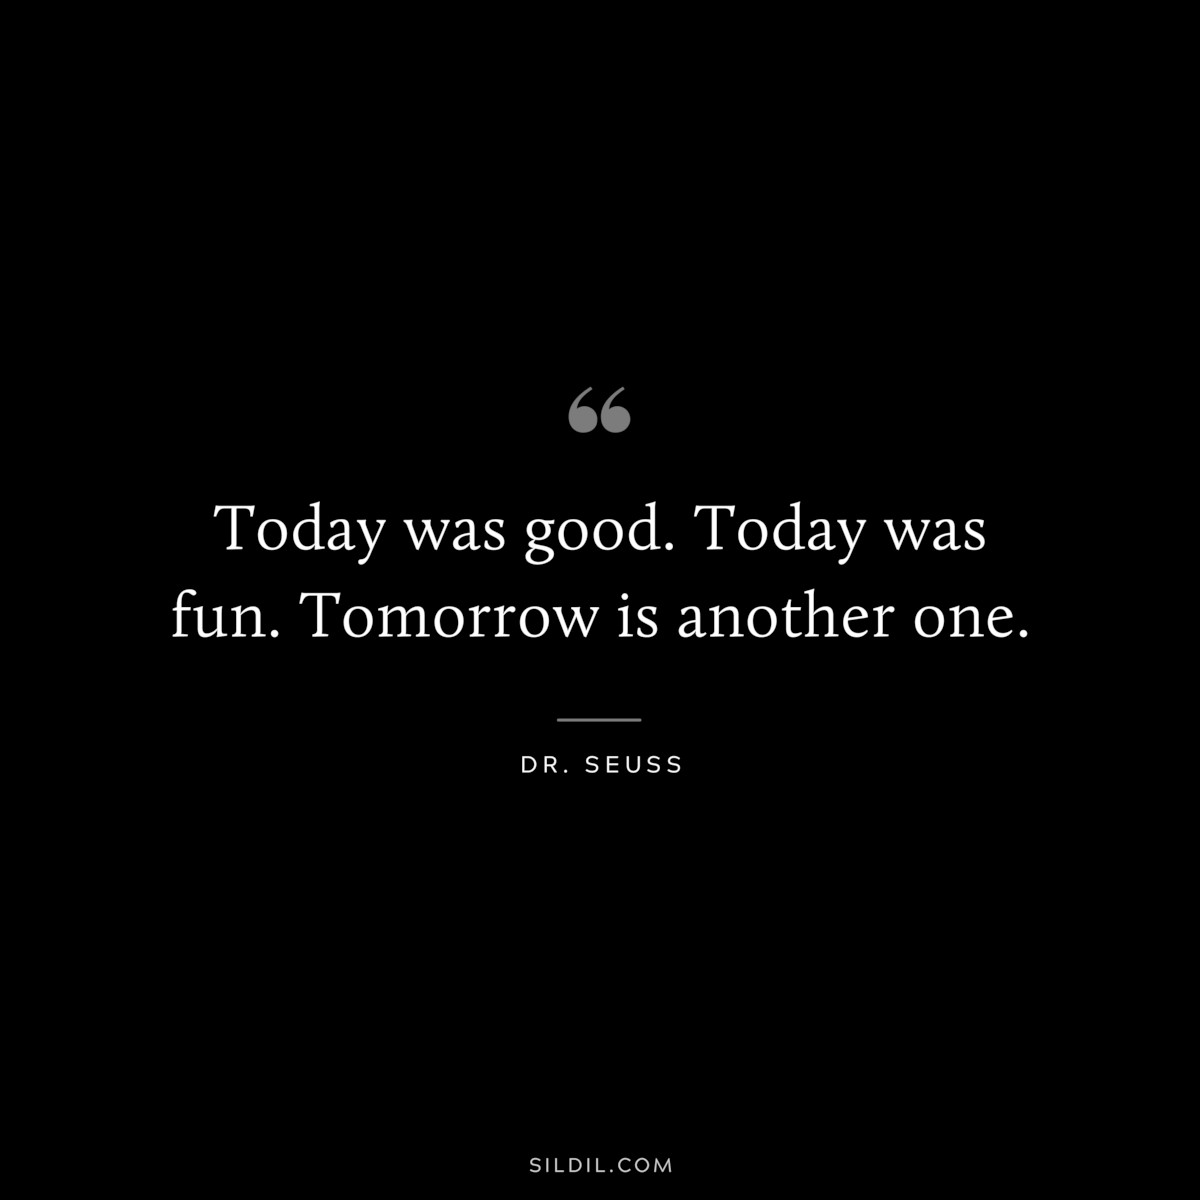 Today was good. Today was fun. Tomorrow is another one. ― Dr. Seuss